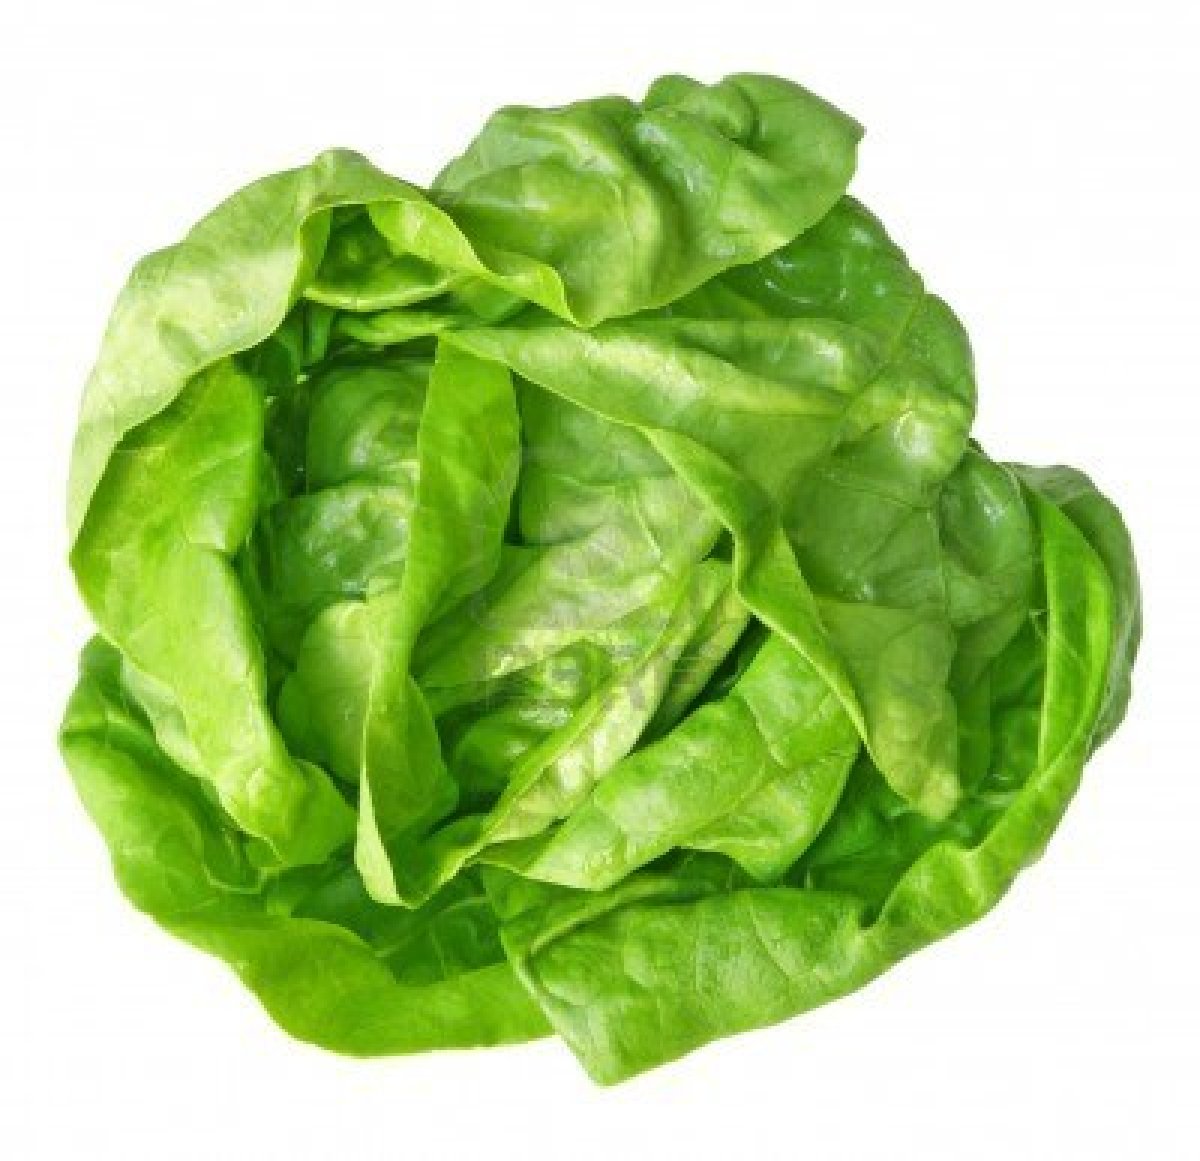 Lettuce free download clip art on clipart library.